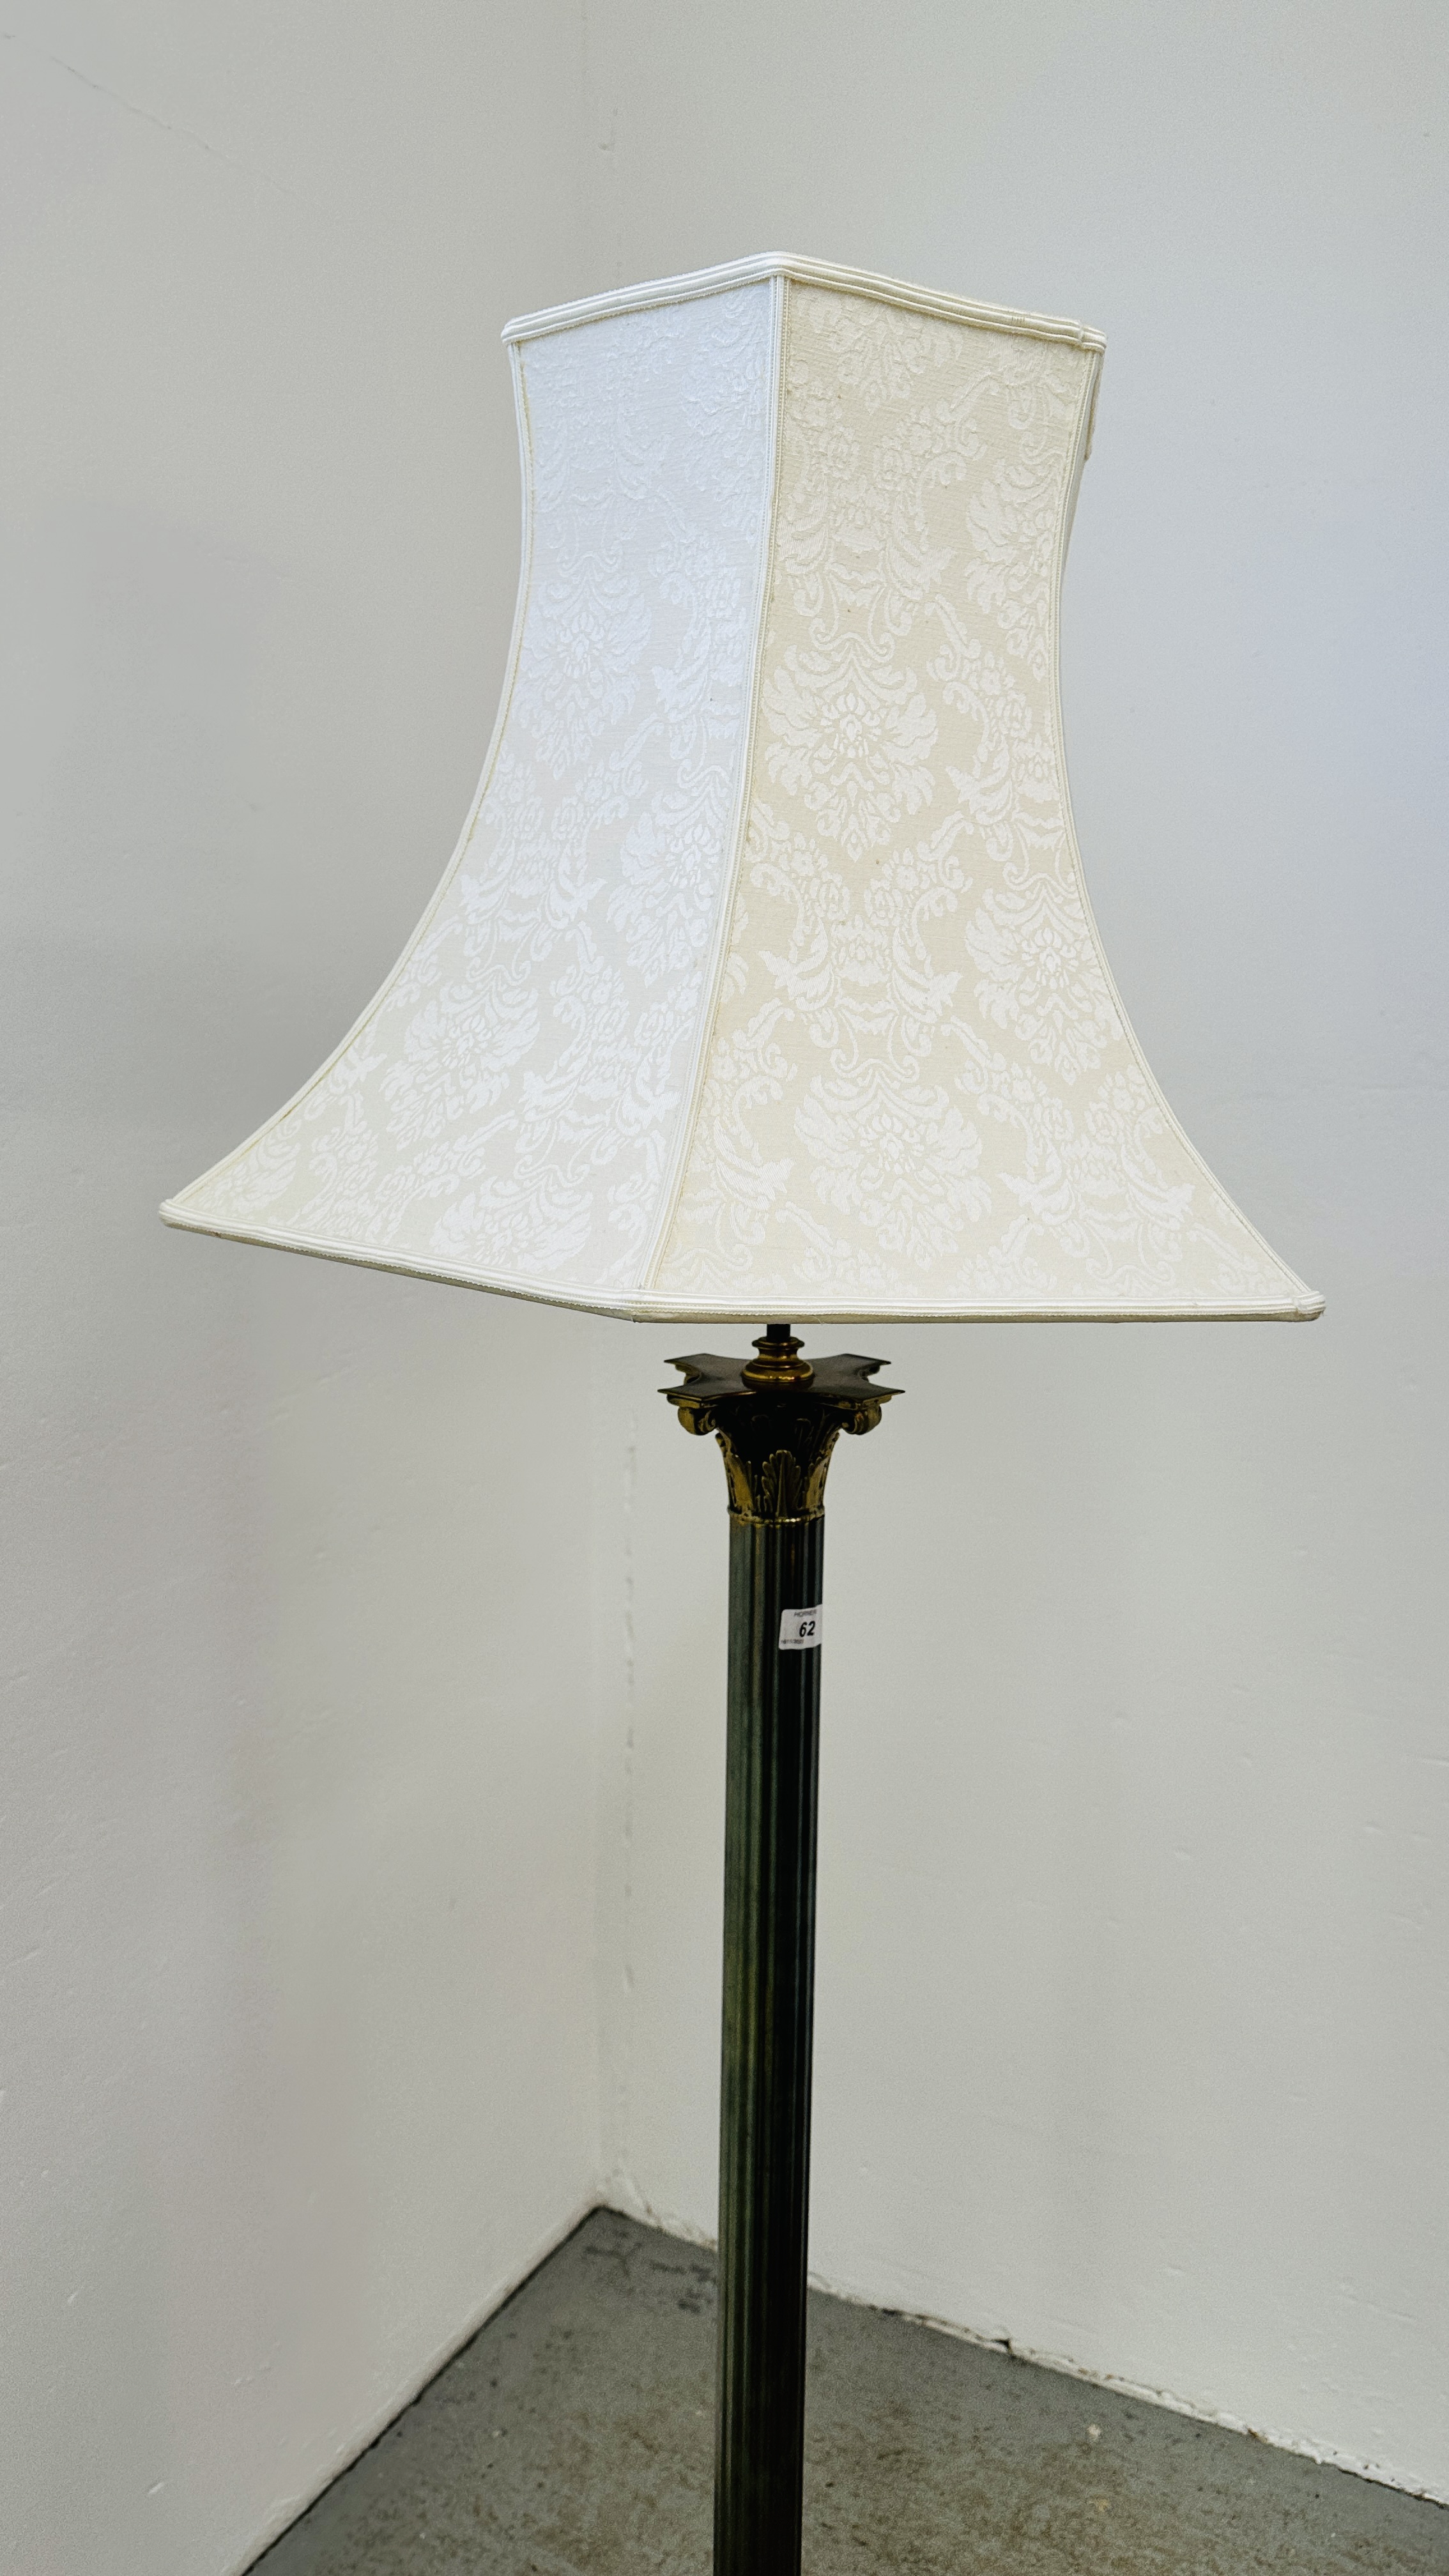 A HEAVY BRASS CORINTHIAN COLUMN DESIGN FLOOR STANDING LAMP WITH CREAM PATTERNED SHADE - CABLE - Image 2 of 8